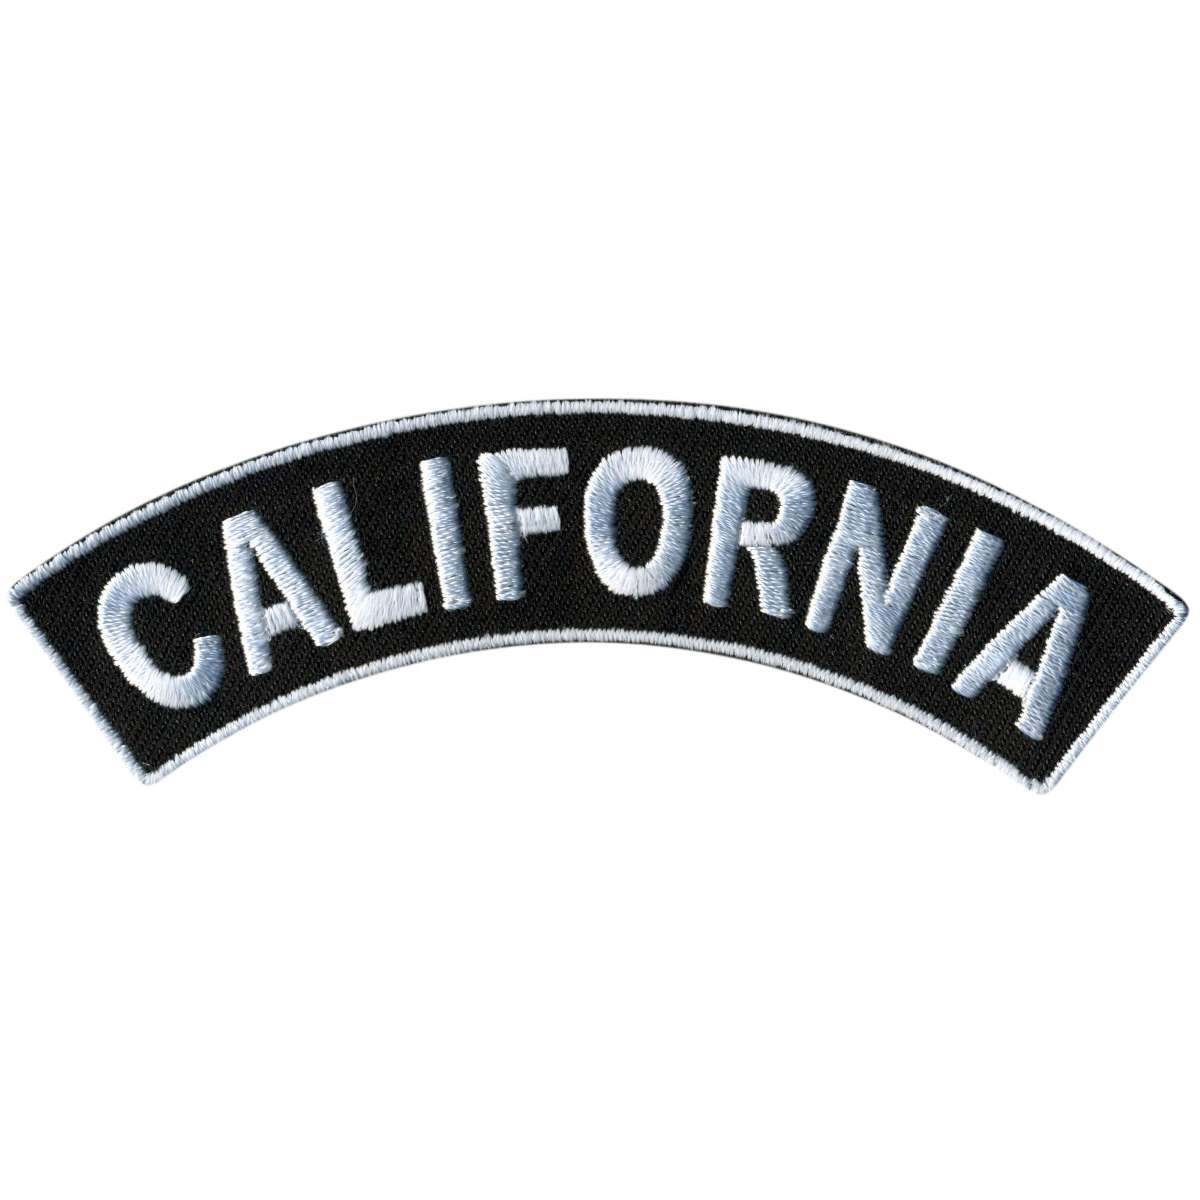 Hot Leathers California 4” X 1” Top Rocker Patch PPM4010